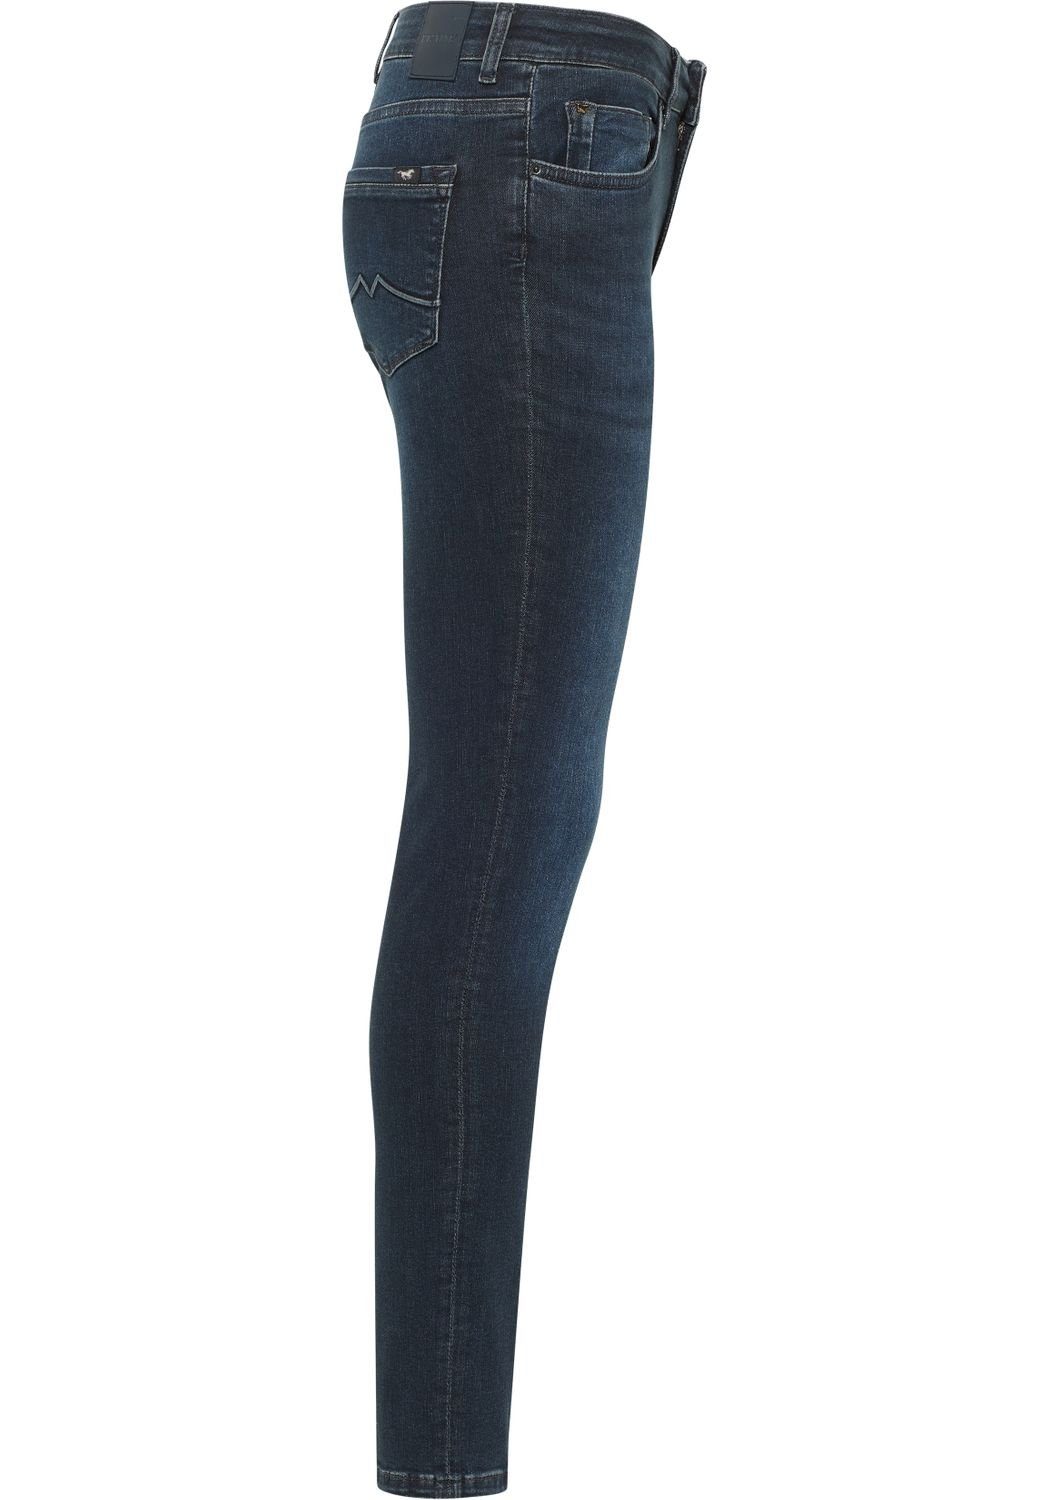 MUSTANG Slim-fit-Jeans Stretch SHELBY mit